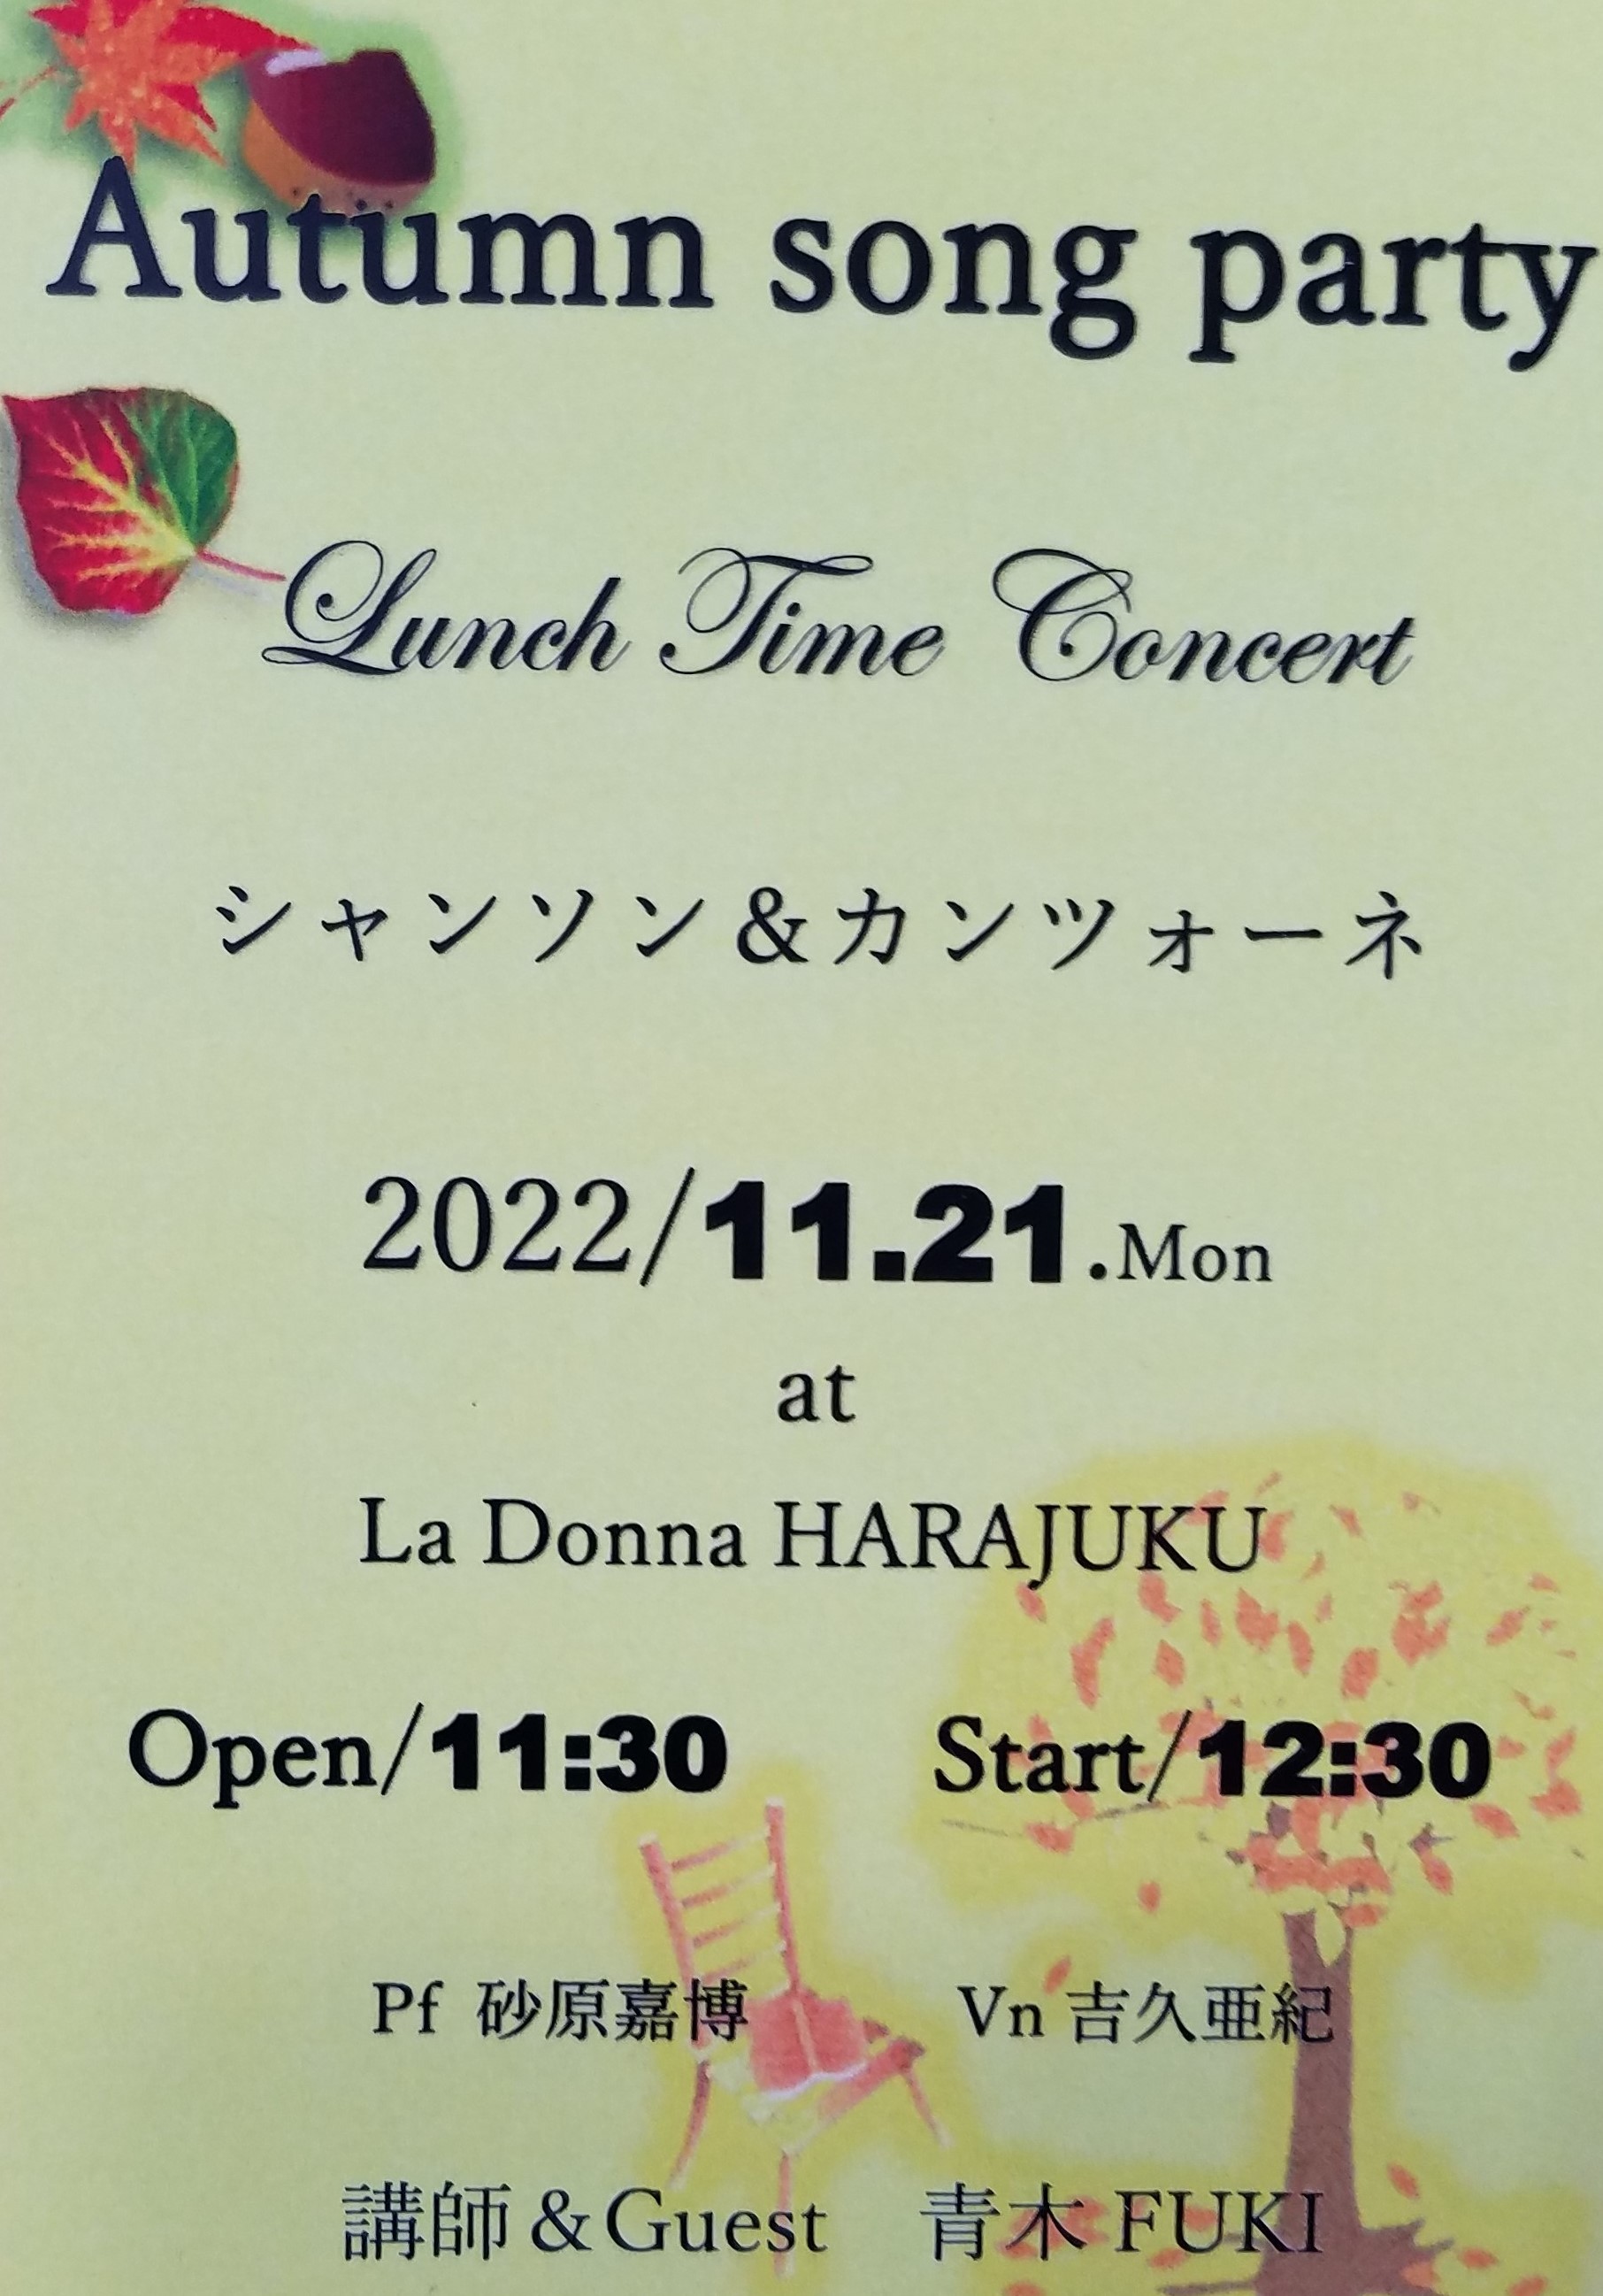 Autumn　song　party　～Lunch　Time　Concert～ シャンソン＆カンツォーネ